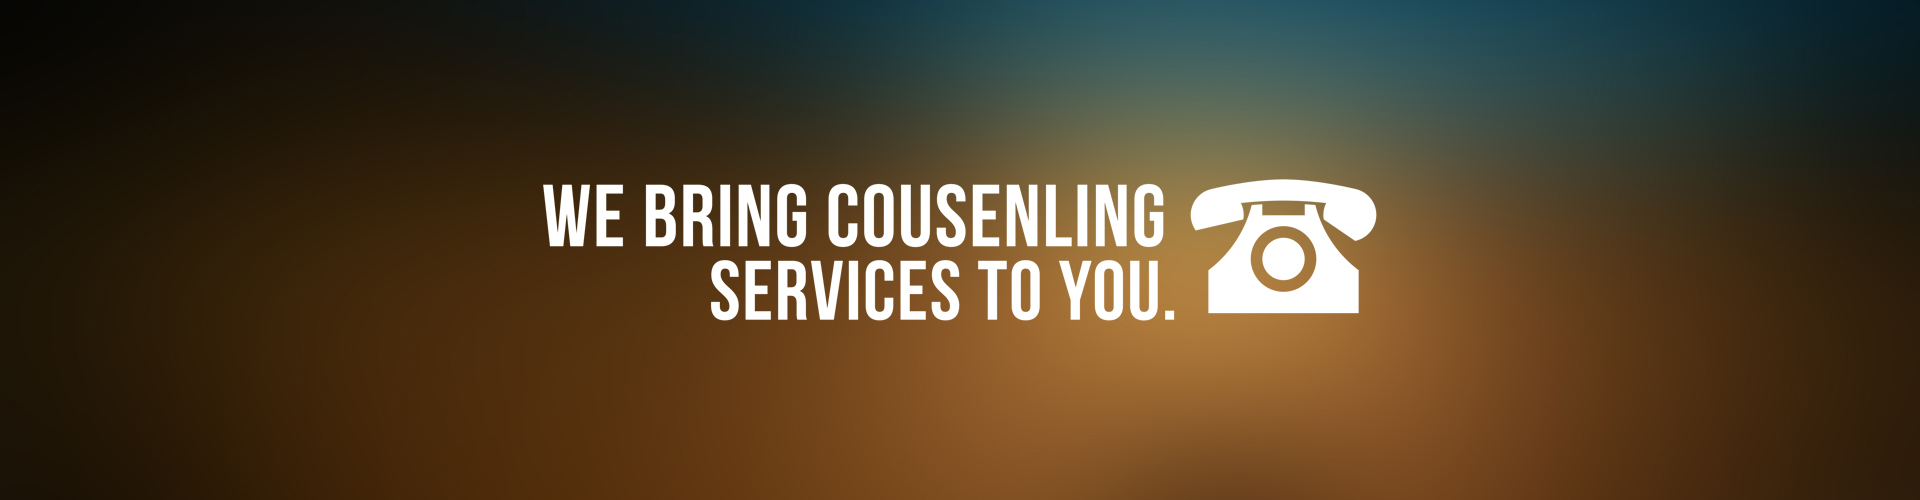 We-Bring-Counseling-Services-To-You